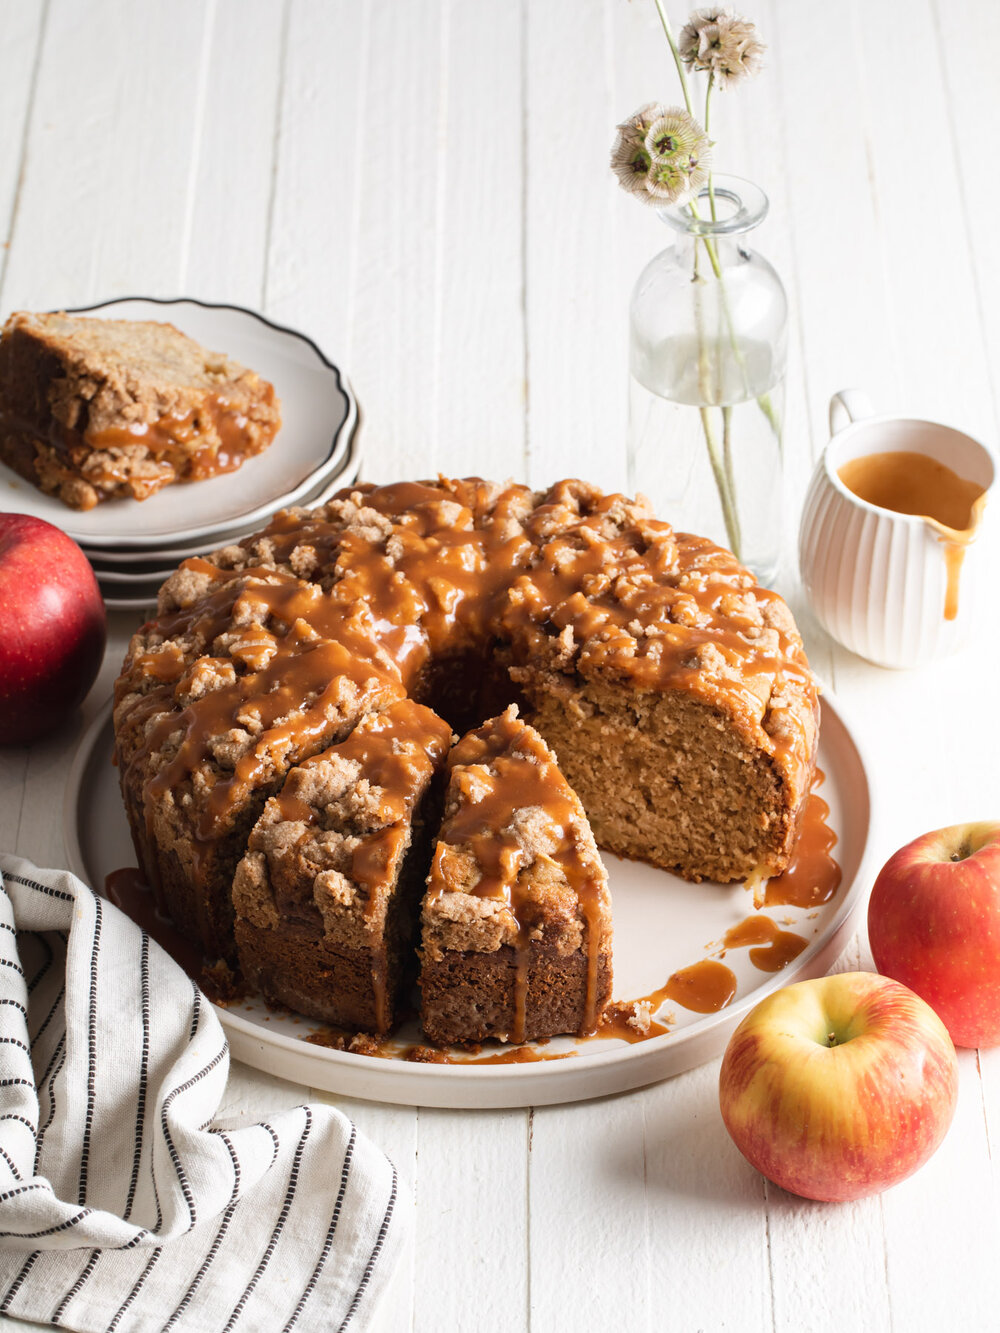 An apple coffee cake baked in a tube-pan and cut into slices with crumb topping and caramel sauce.